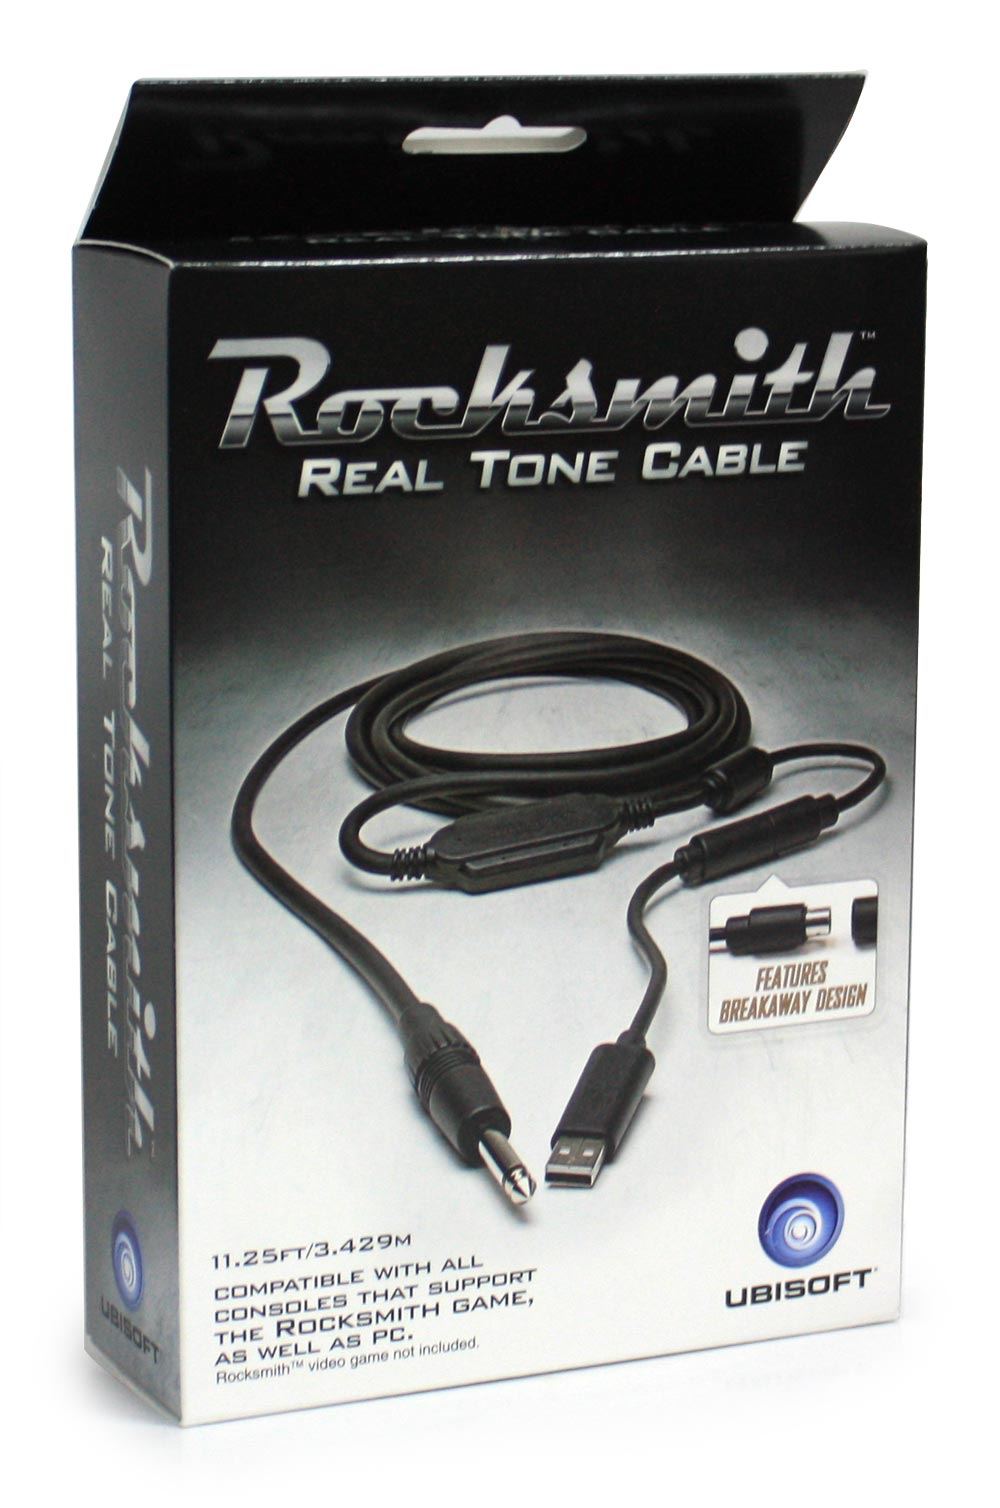 where can i buy a rocksmith real tone cable